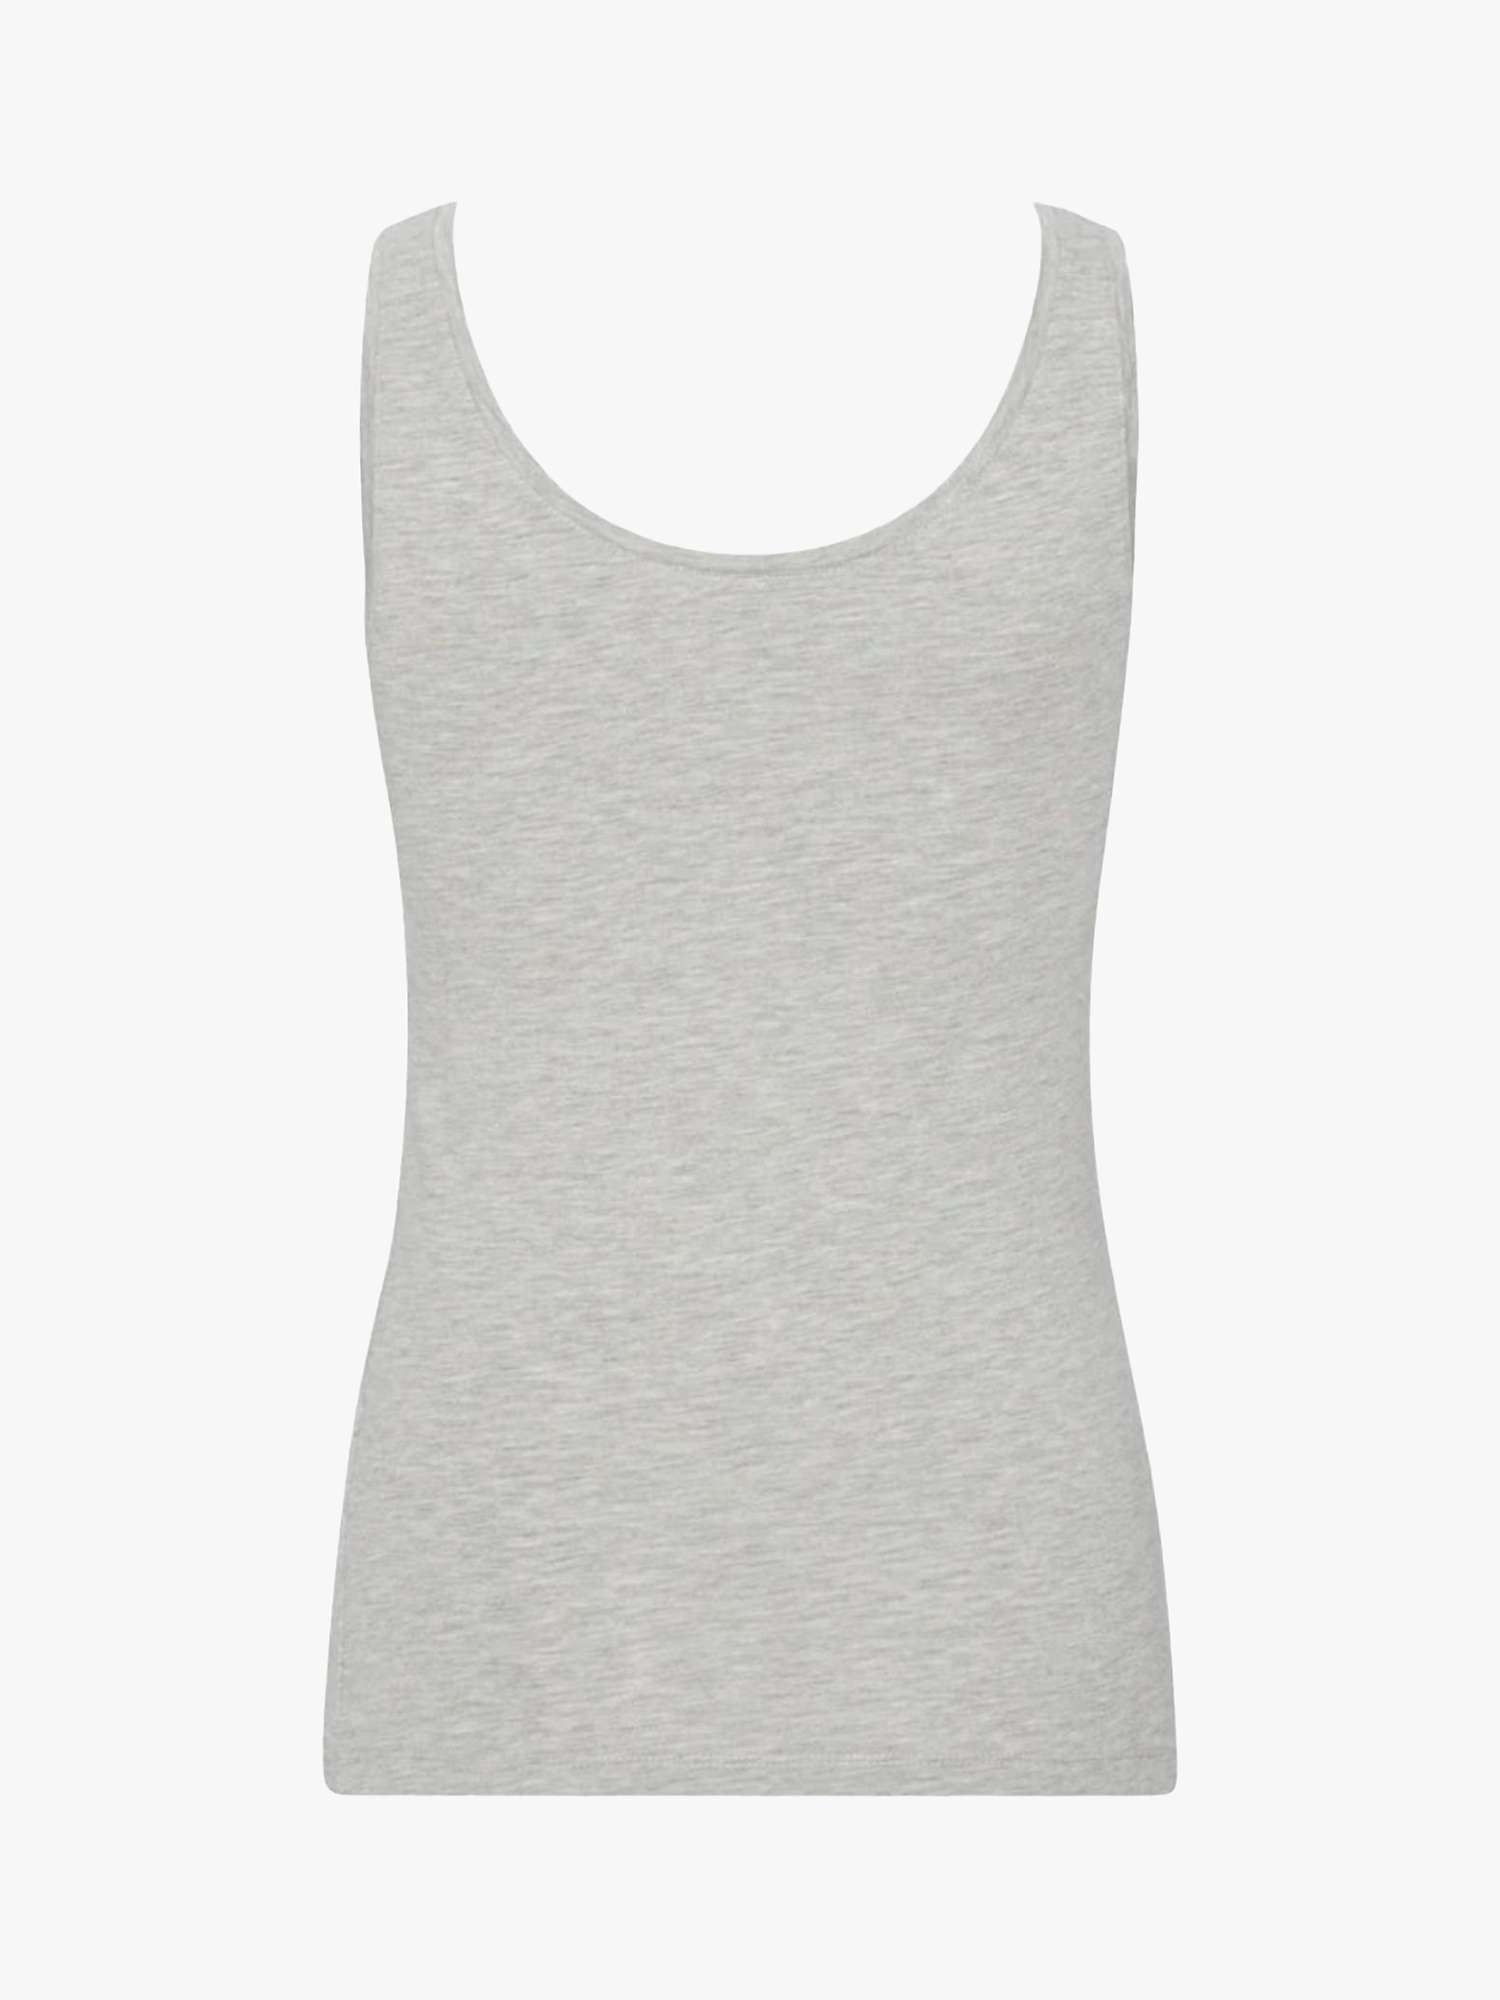 Buy A-VIEW Stabil Tank Top Online at johnlewis.com